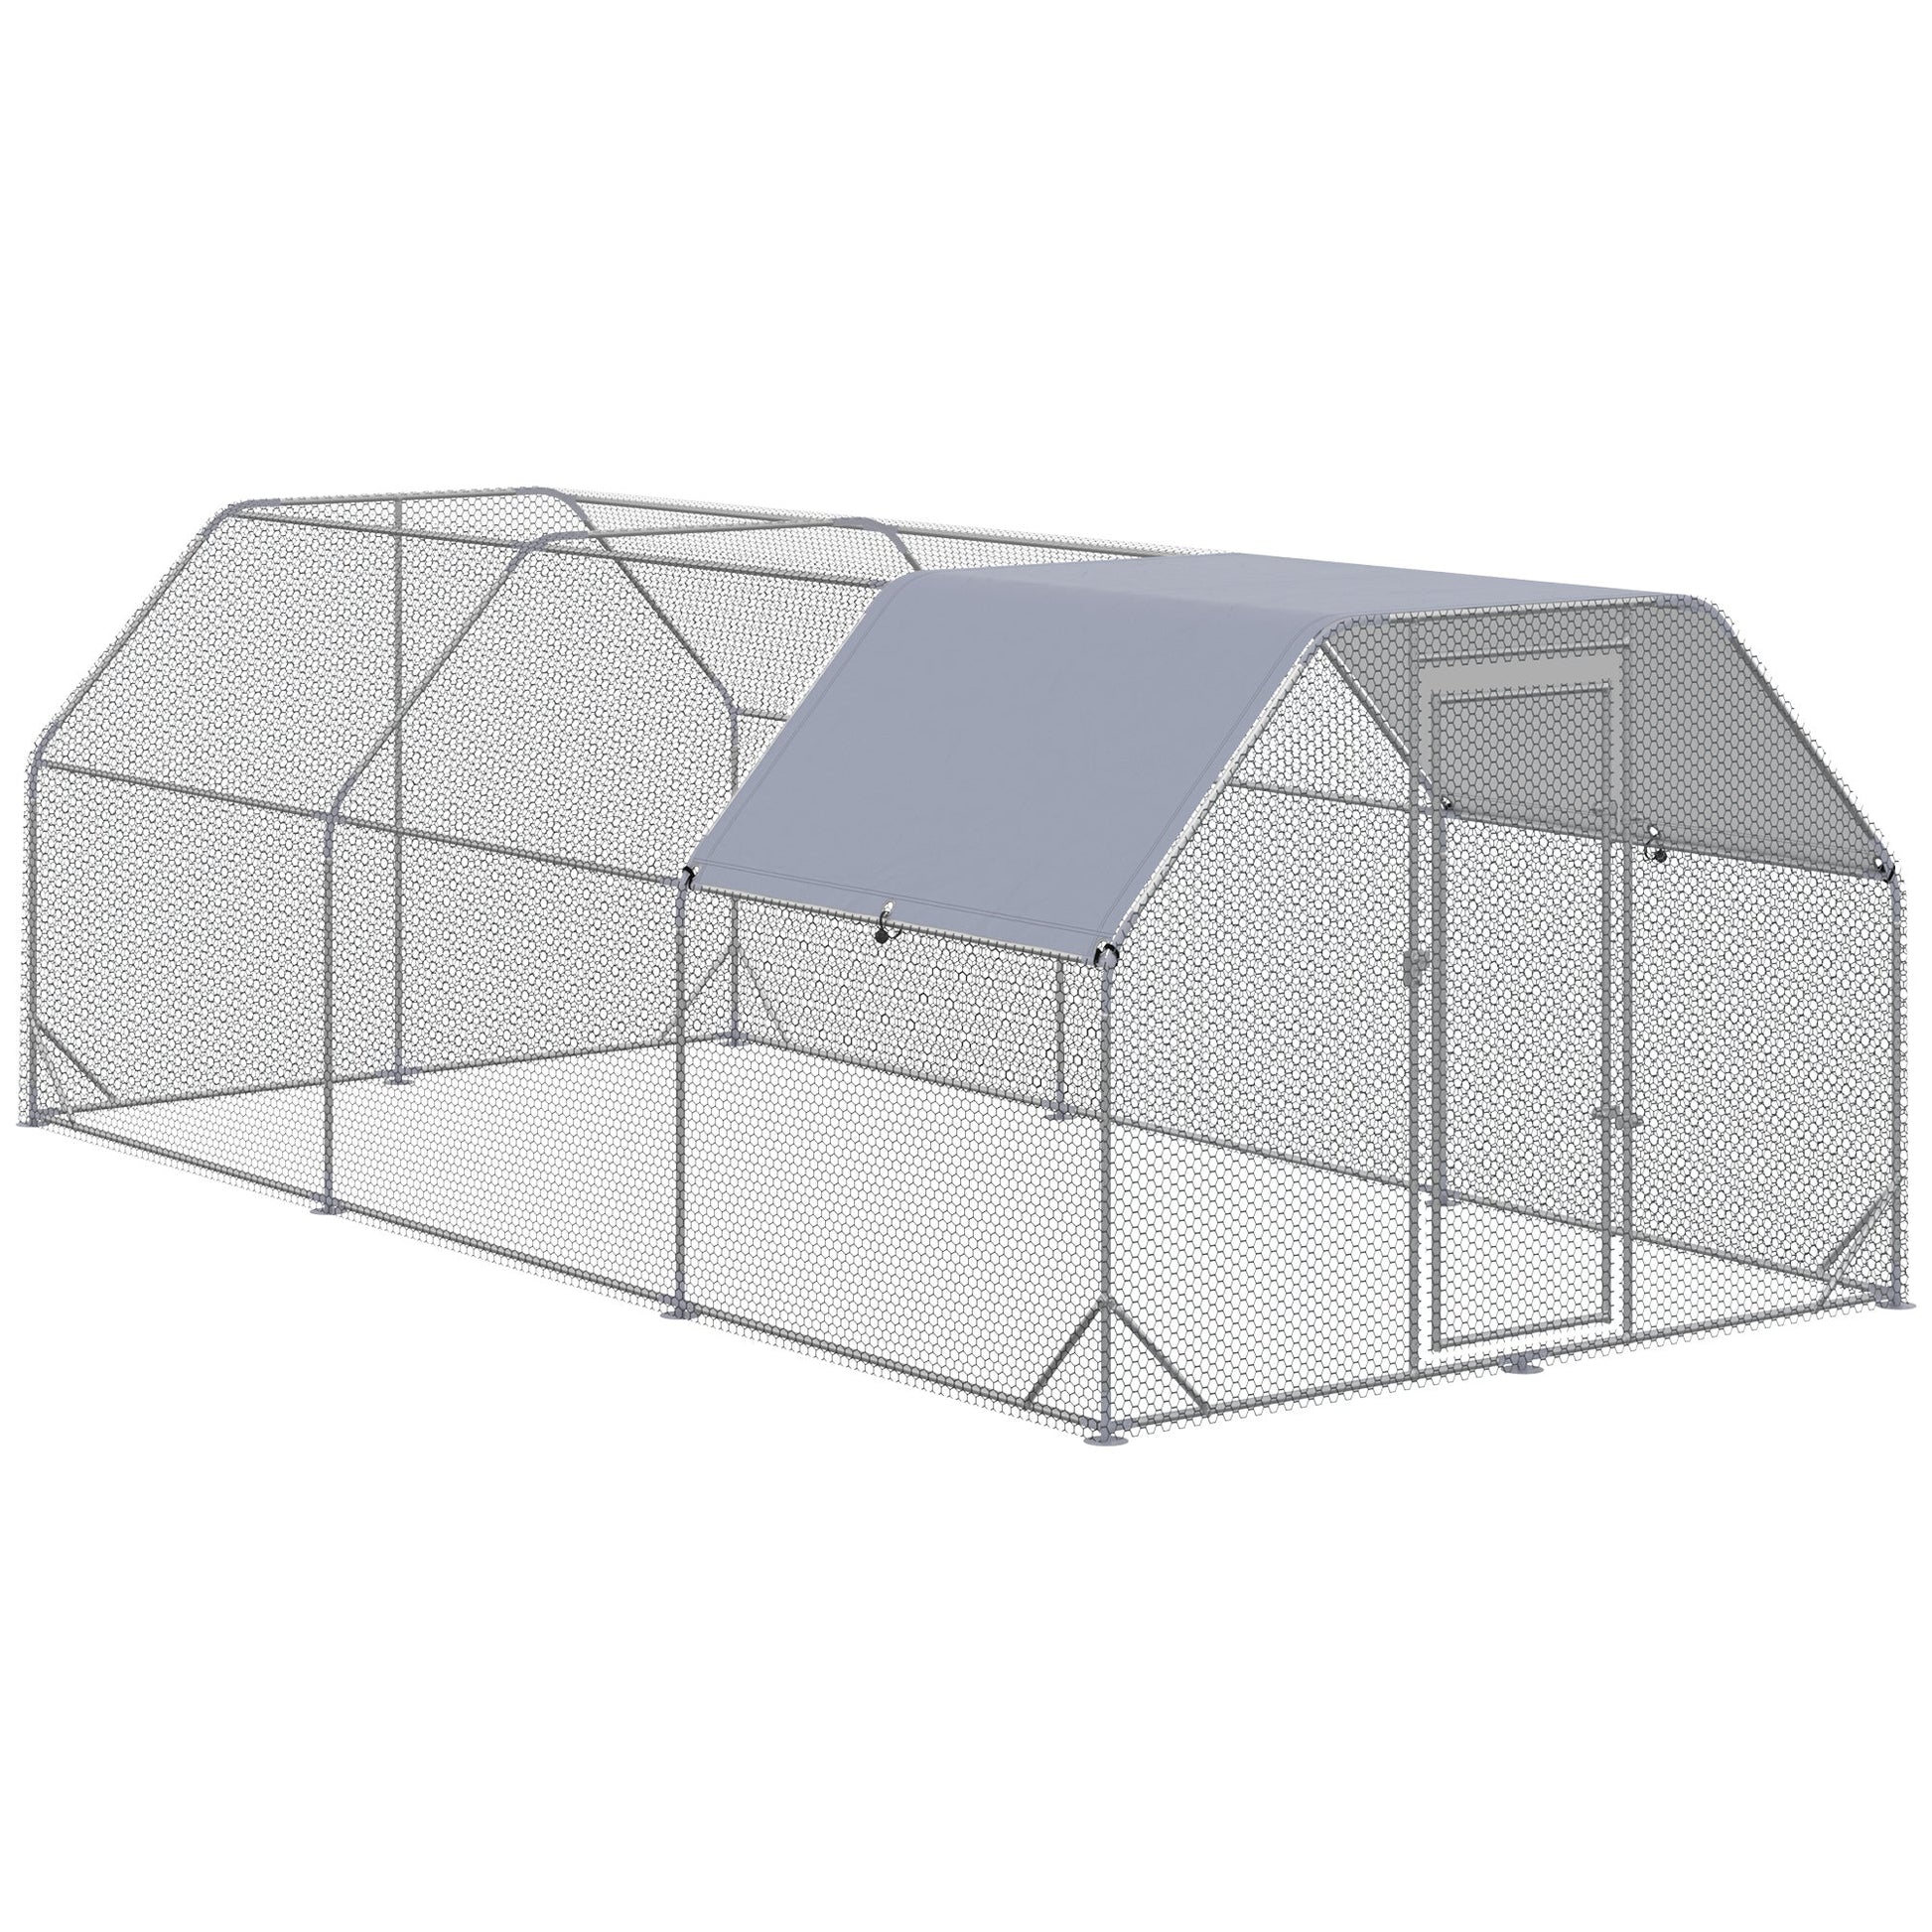 Metal Chicken Coop for 15-18 Chickens, Walk In Chicken Run Outdoor with Cover for Backyard Farm, 18.7' x 9.2' x 6.4' at Gallery Canada